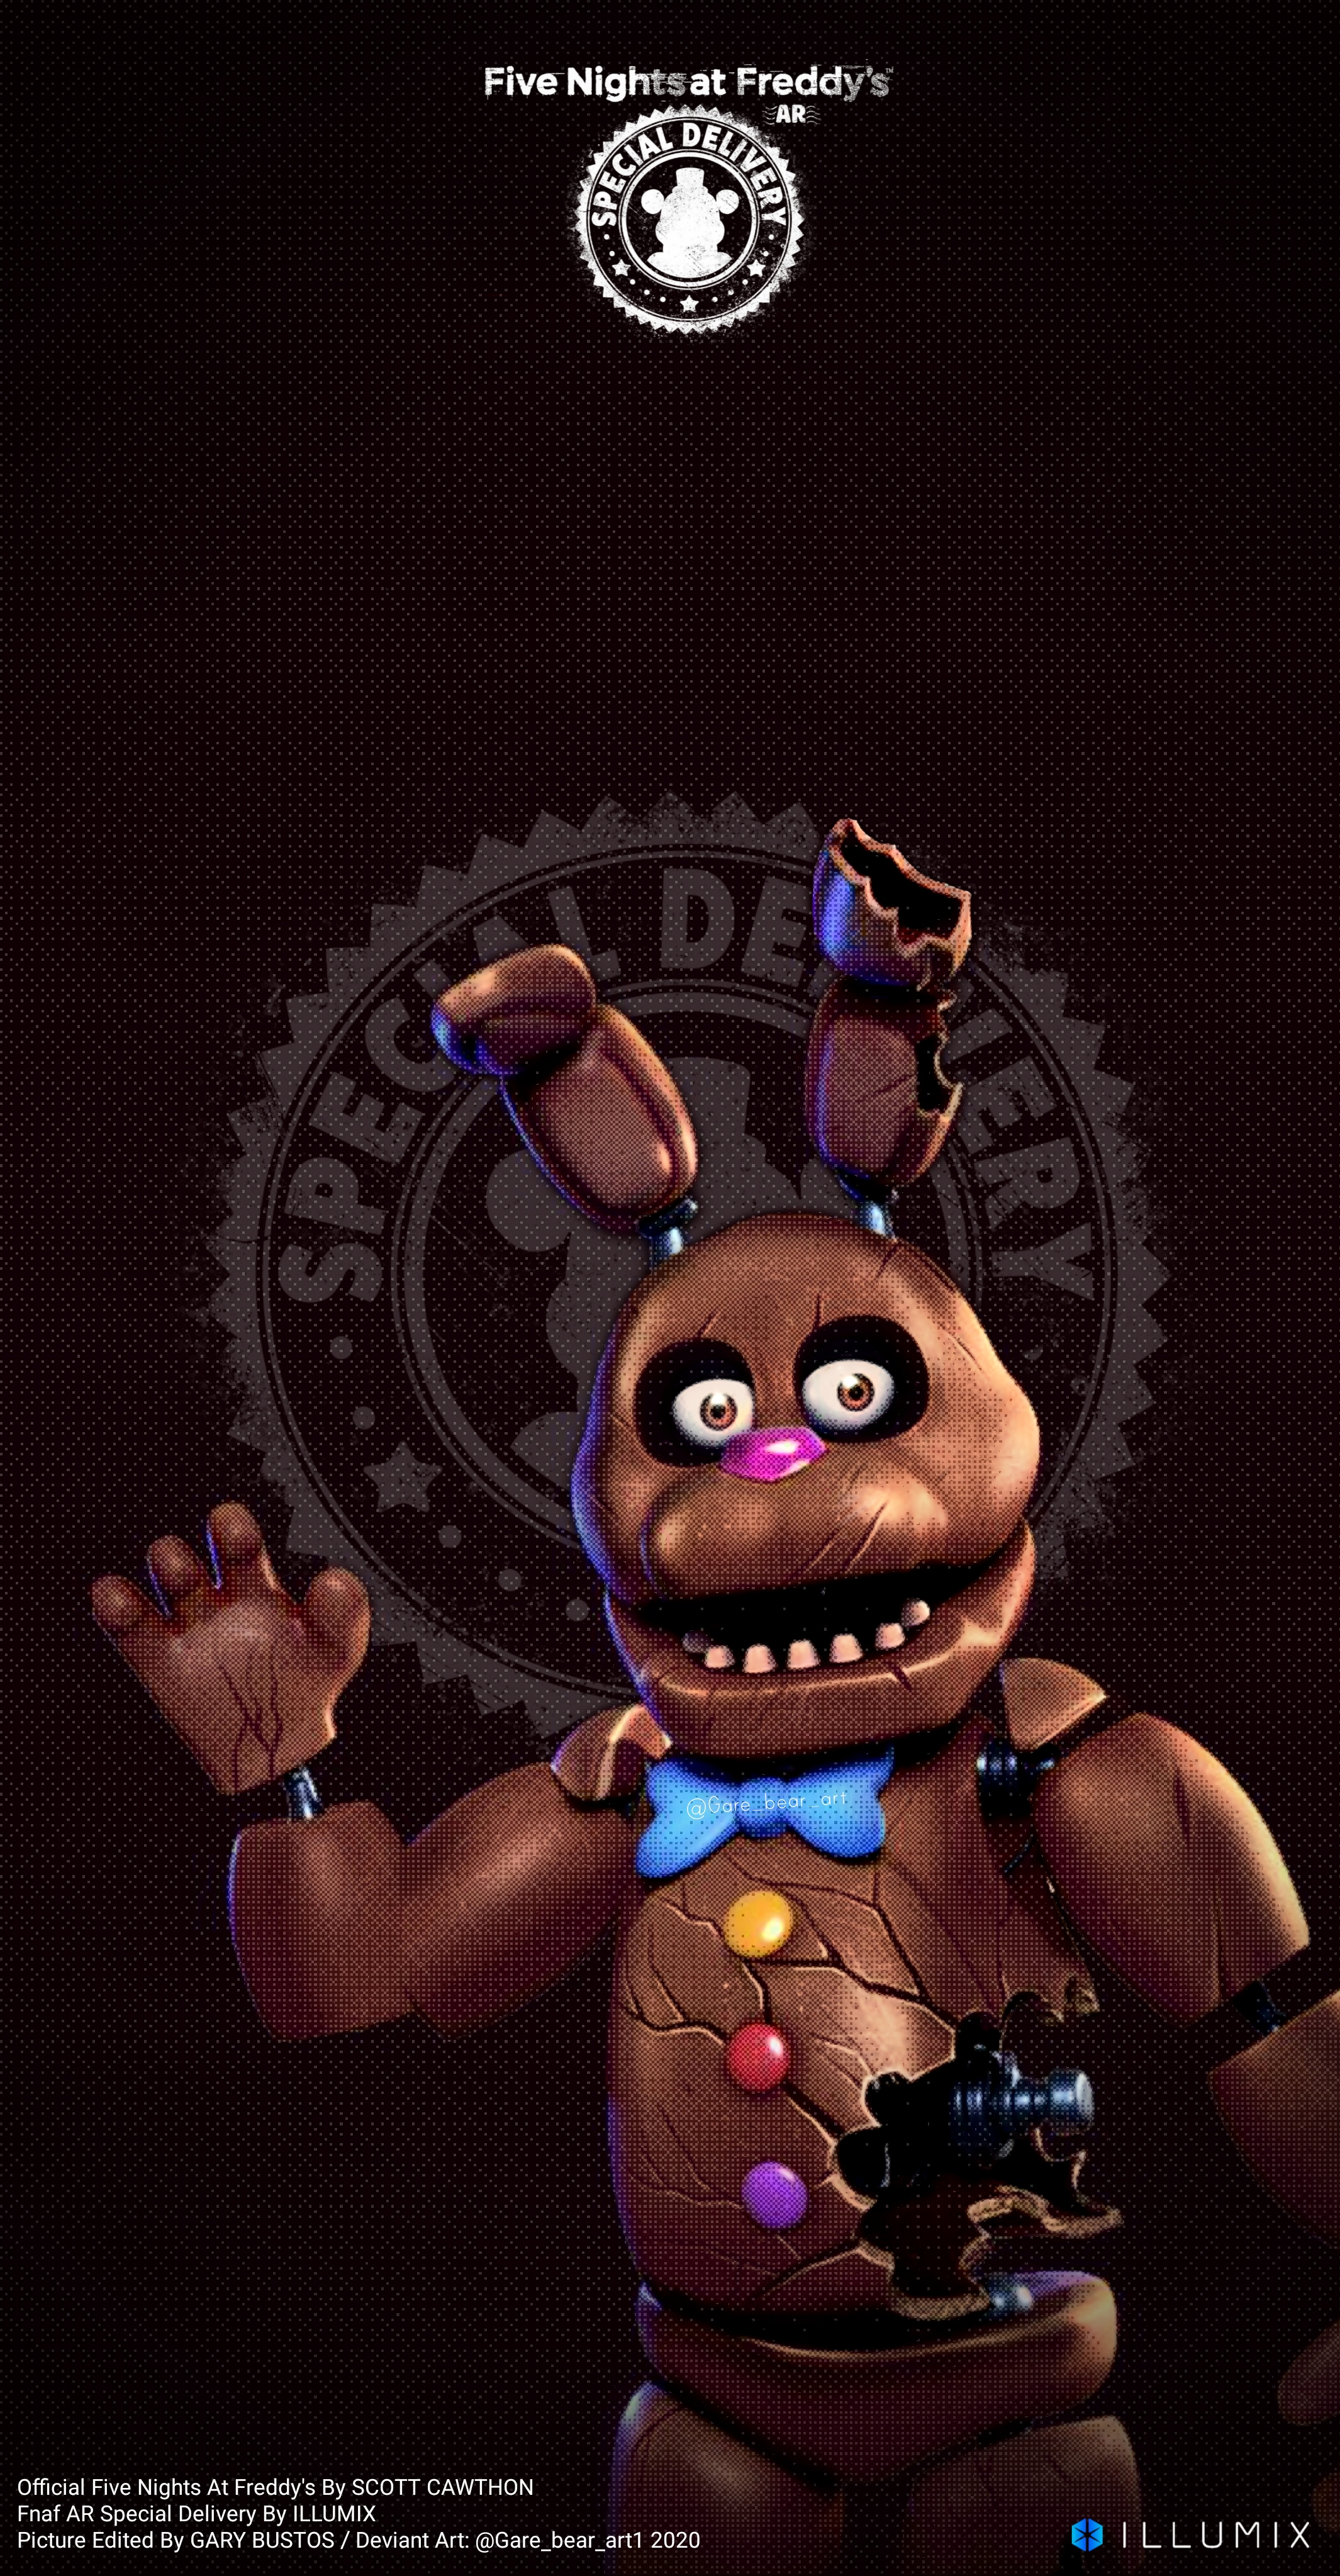 Chocolate bonnie wallpaper for phones by garebearart on